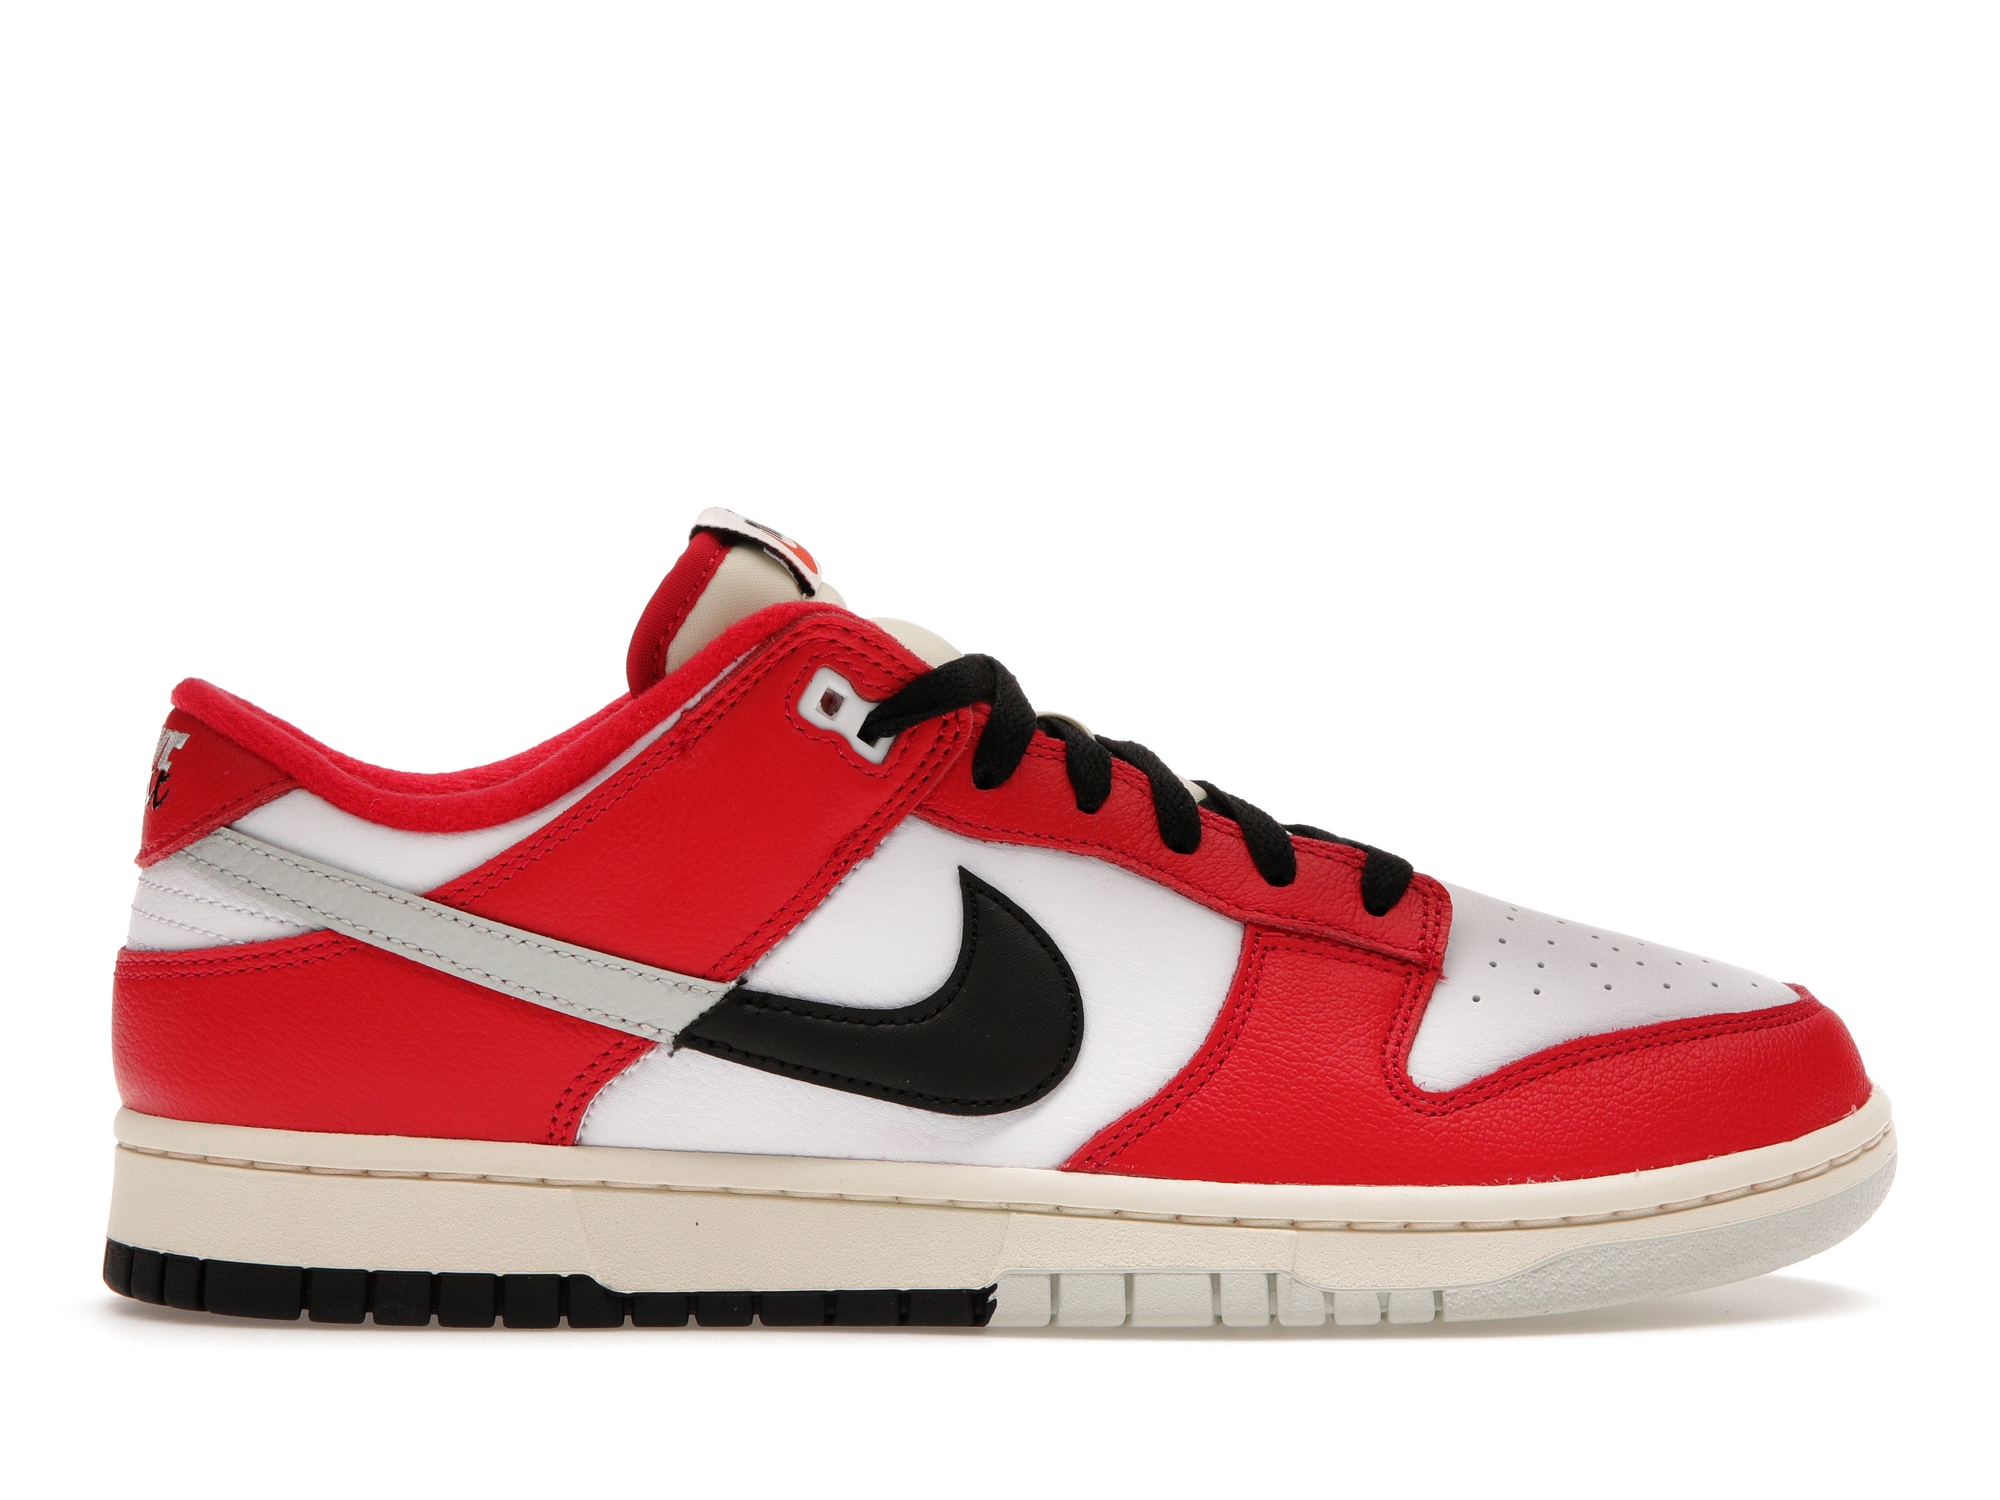 Nike dunk low Chicago ダンク ロー シカゴ スプリット